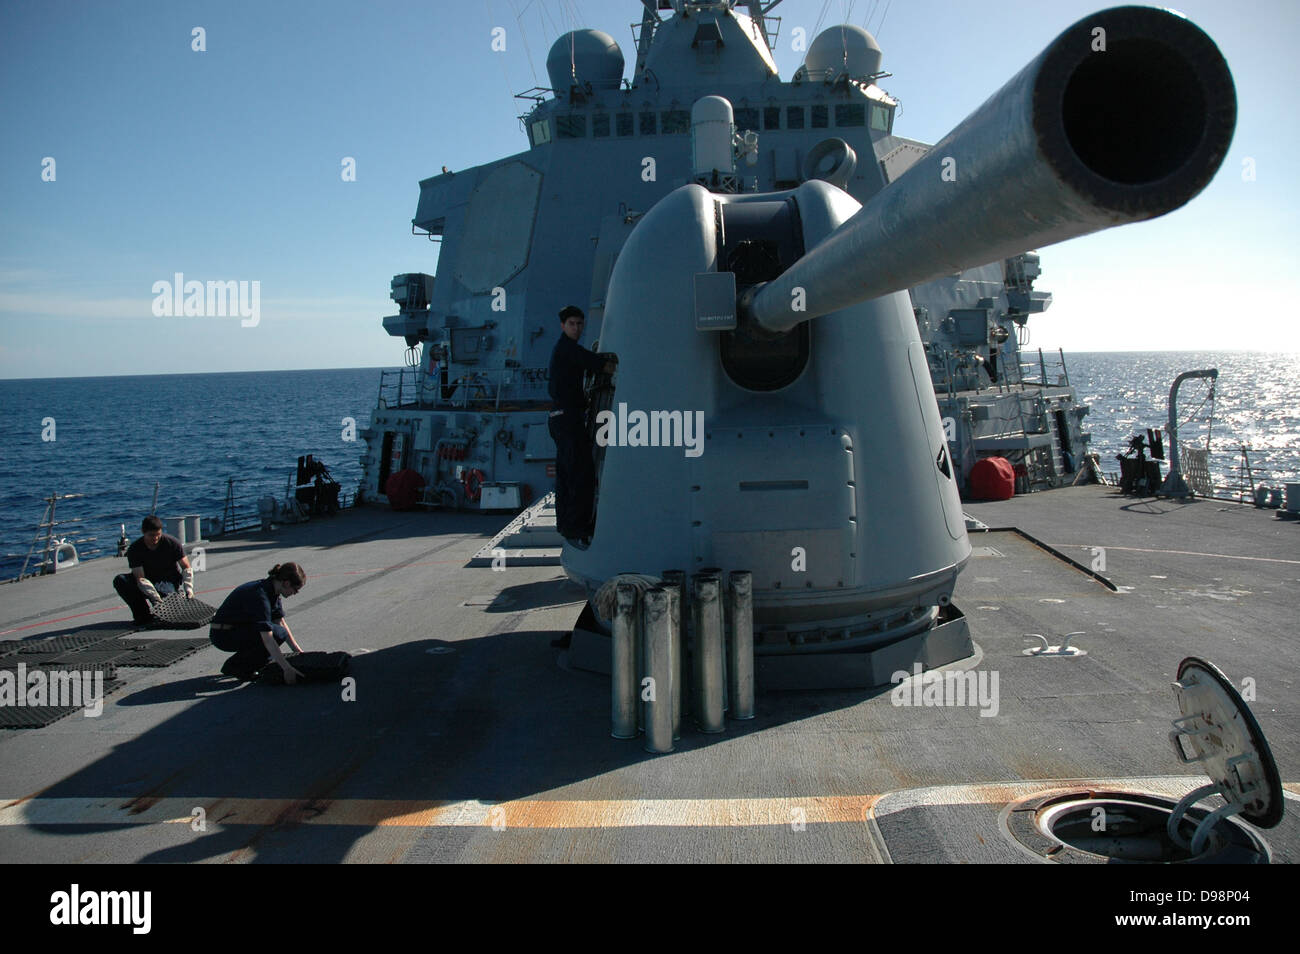 GULF OF THAILAND (June 8, 2013) Sailors assigned to the weapons department aboard the guided-missile destroyer USS Curtis Wilbur (DDG 54) position the ship’s 5-inch gun and clear the deck after a live-fire exercise during the at-sea phase of exercise Coop Stock Photo